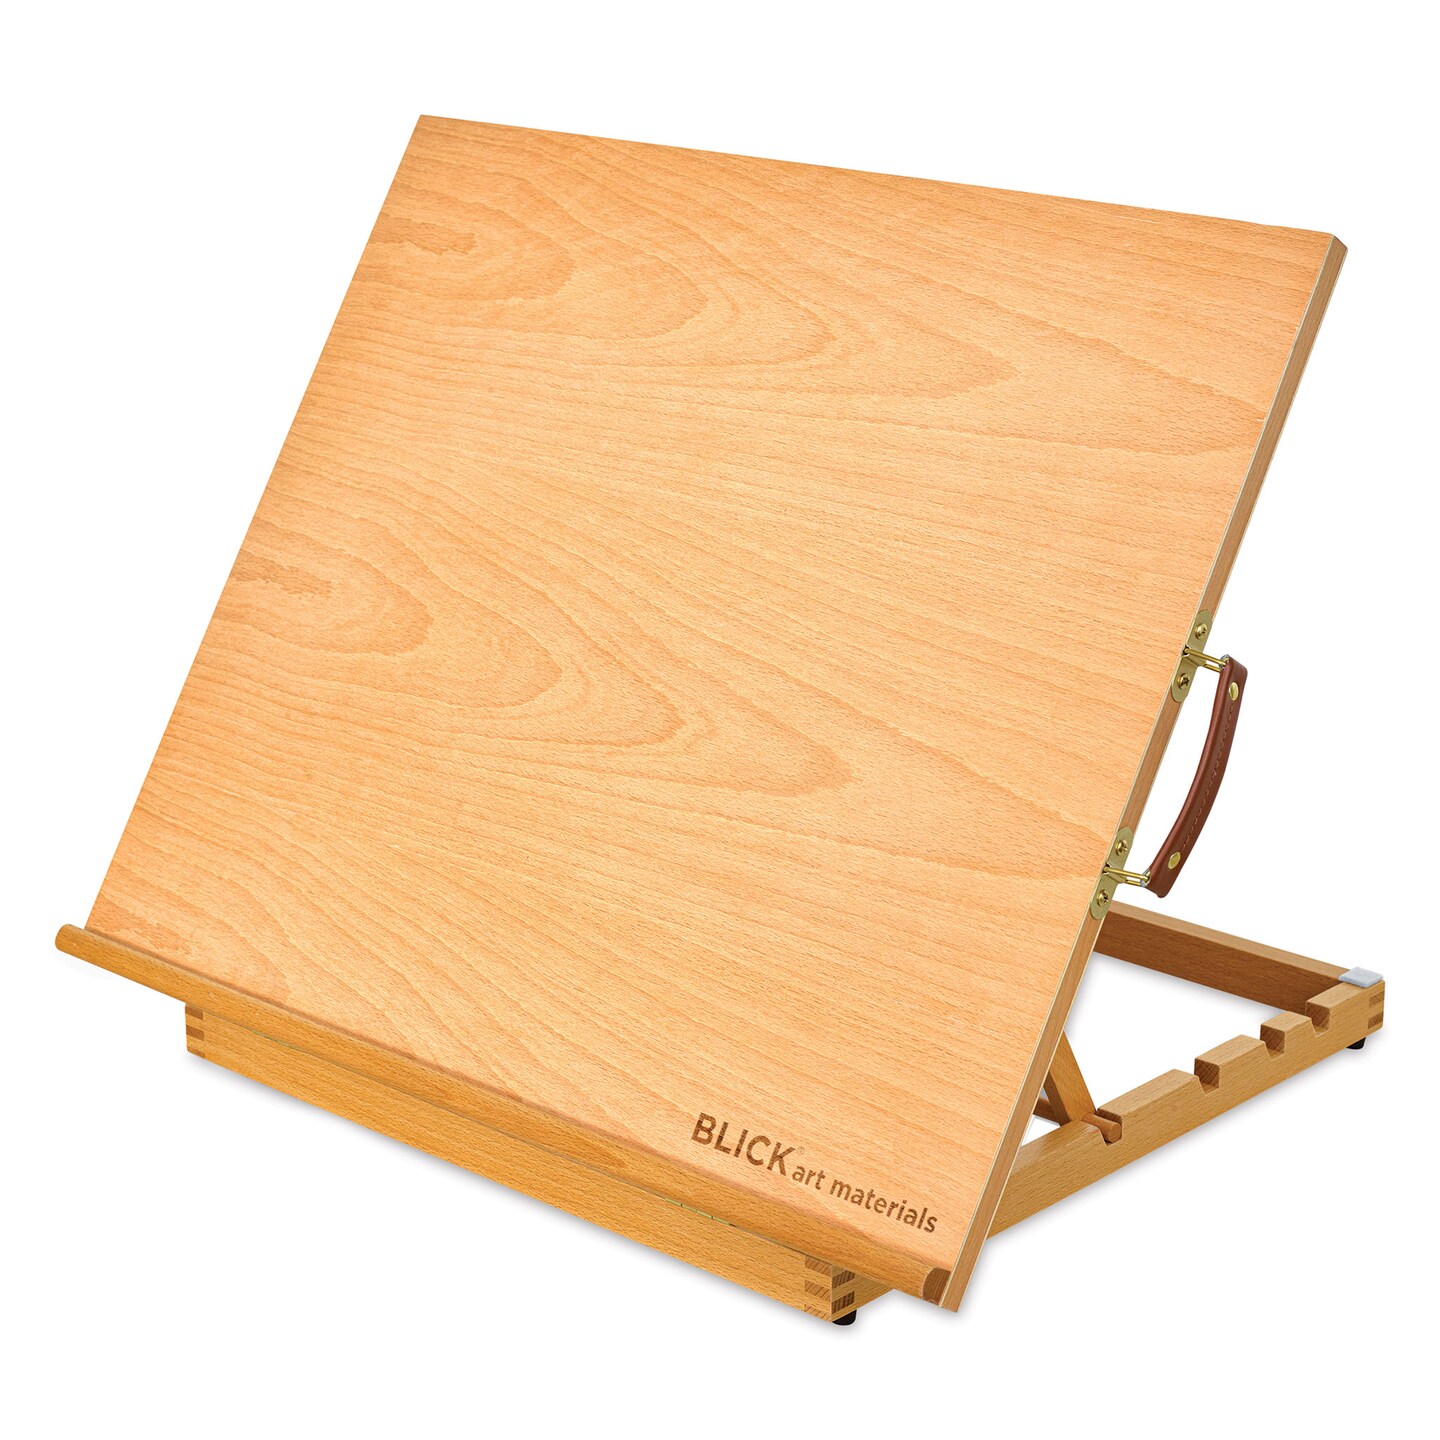 Blick Portable Drafting and Drawing Table